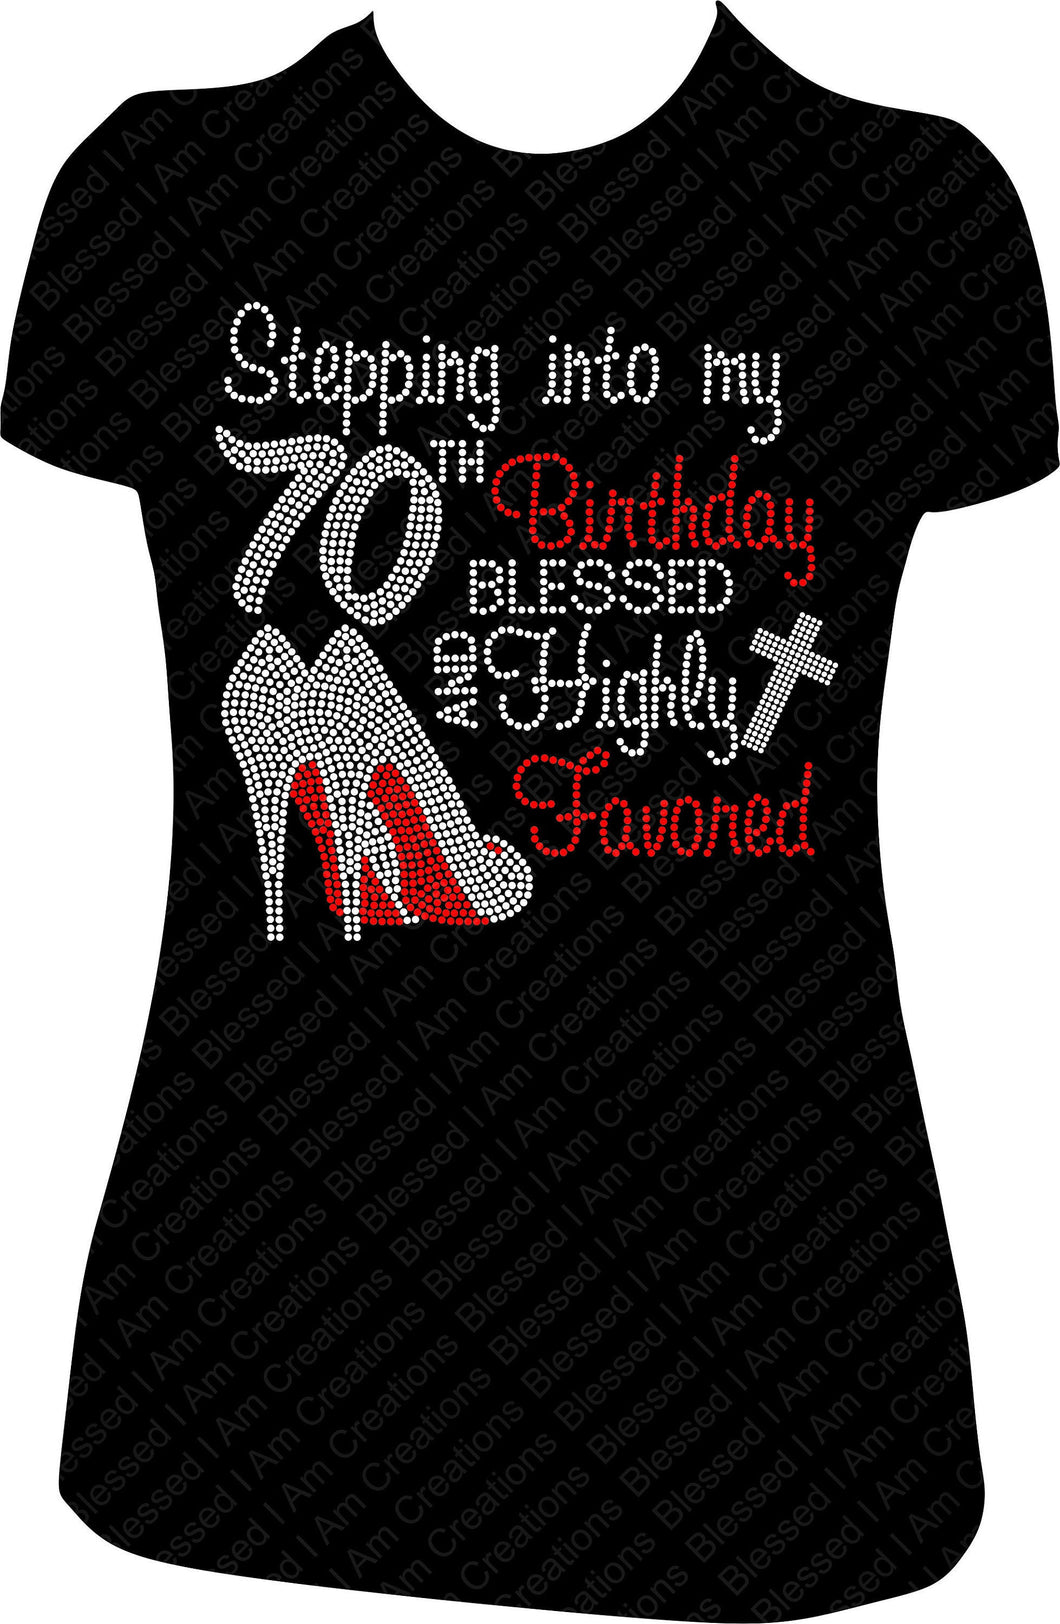 Stepping into my 70th Birthday Blessed and Highly Favored Rhinestone Birthday Shirt